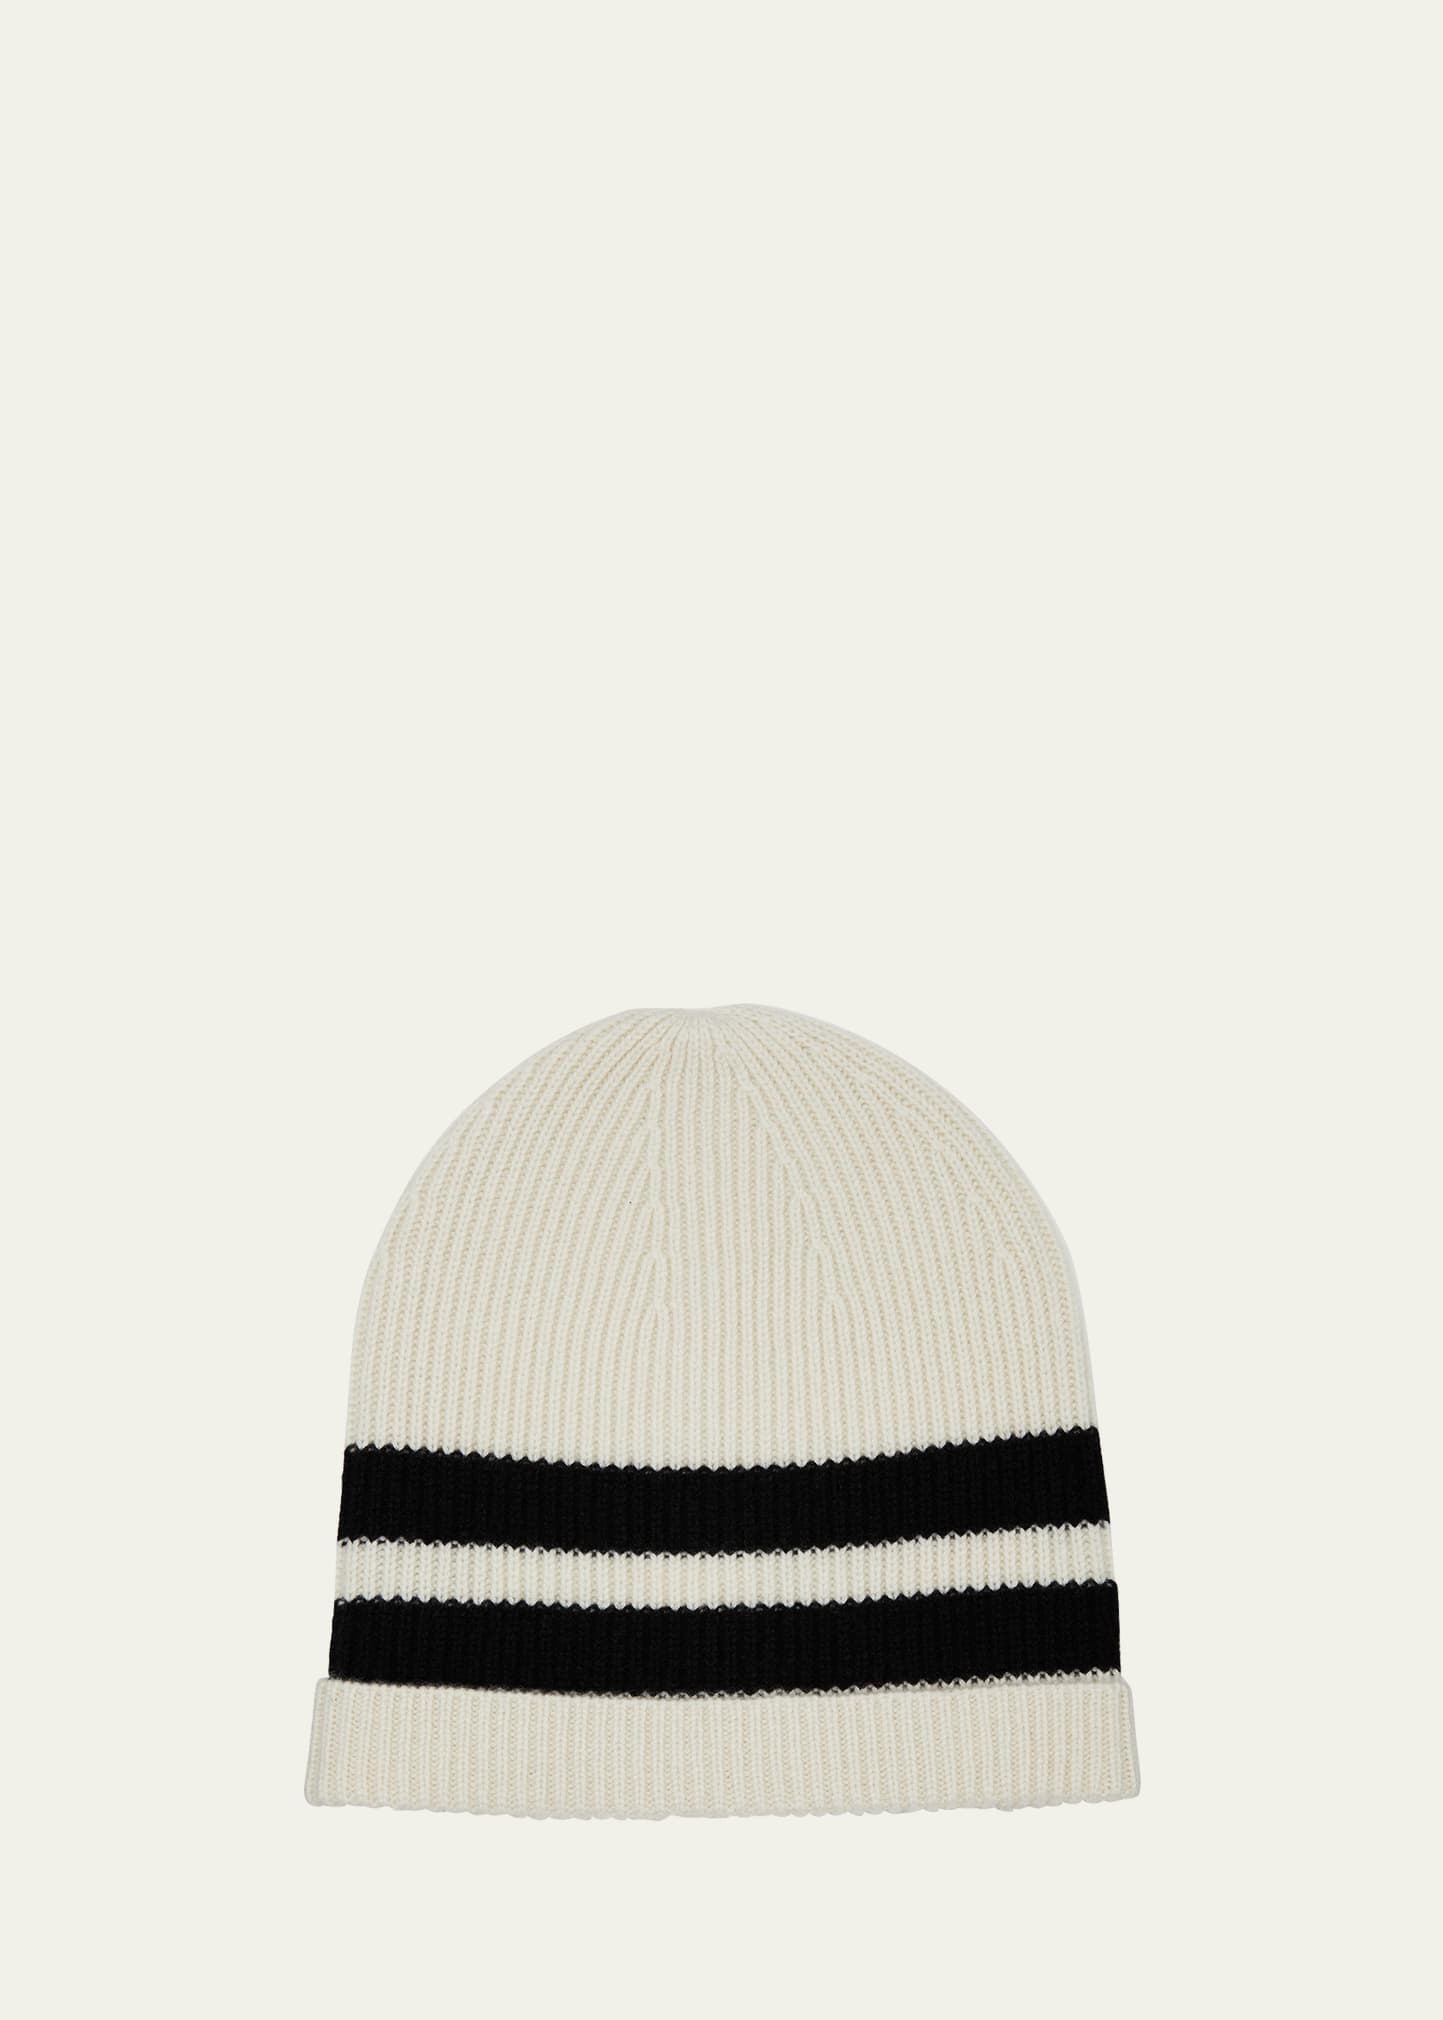 Lisa Yang Florence Striped Cashmere Beanie In Cream